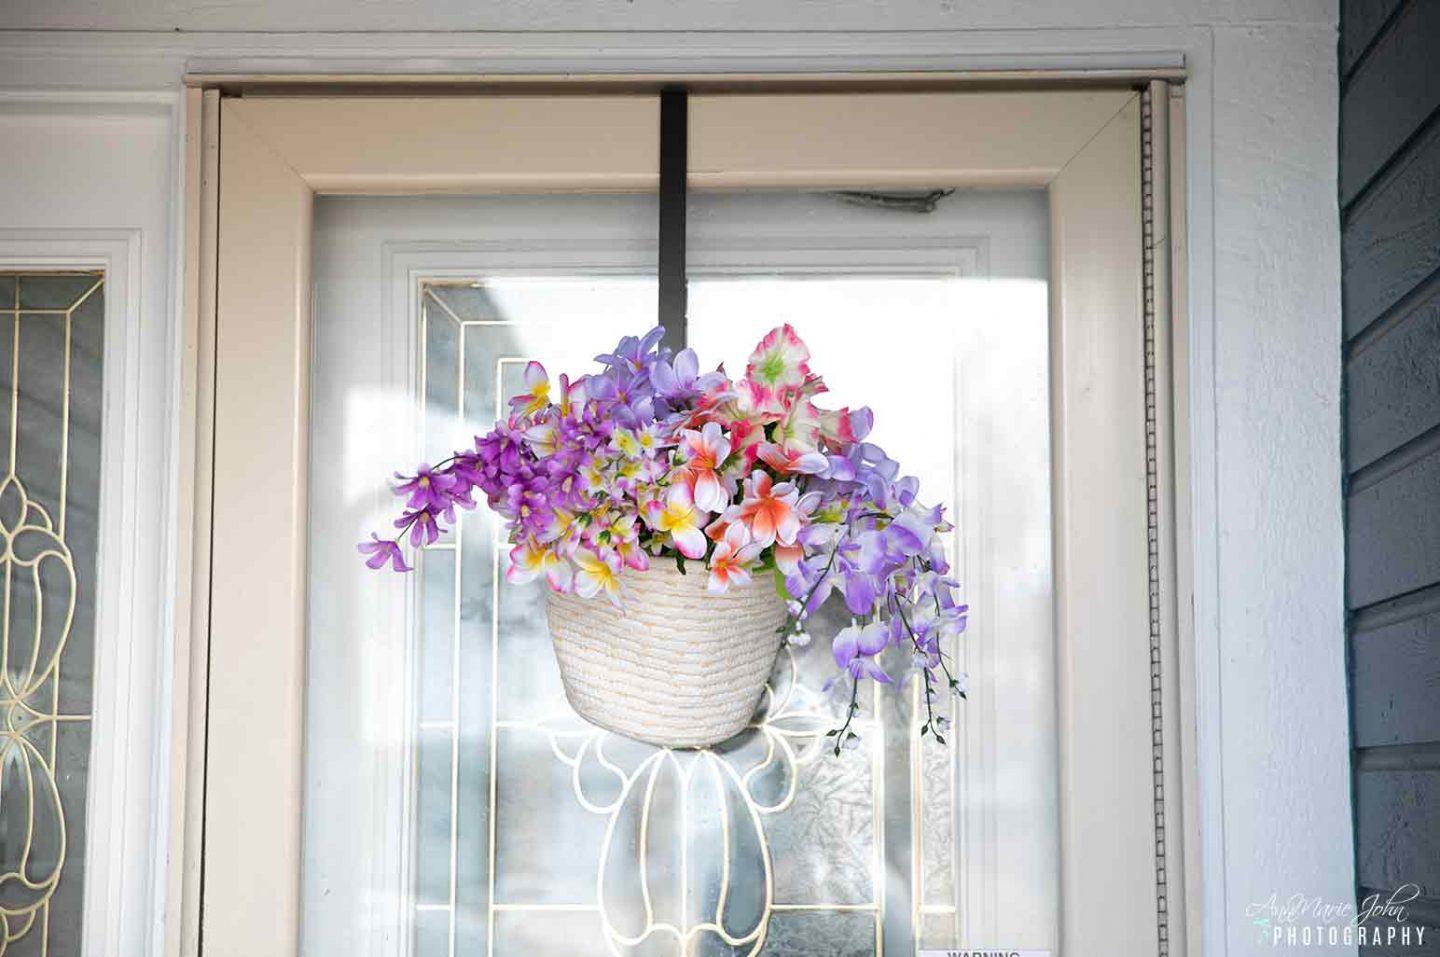 DIY Hanging Basket With Flowers
